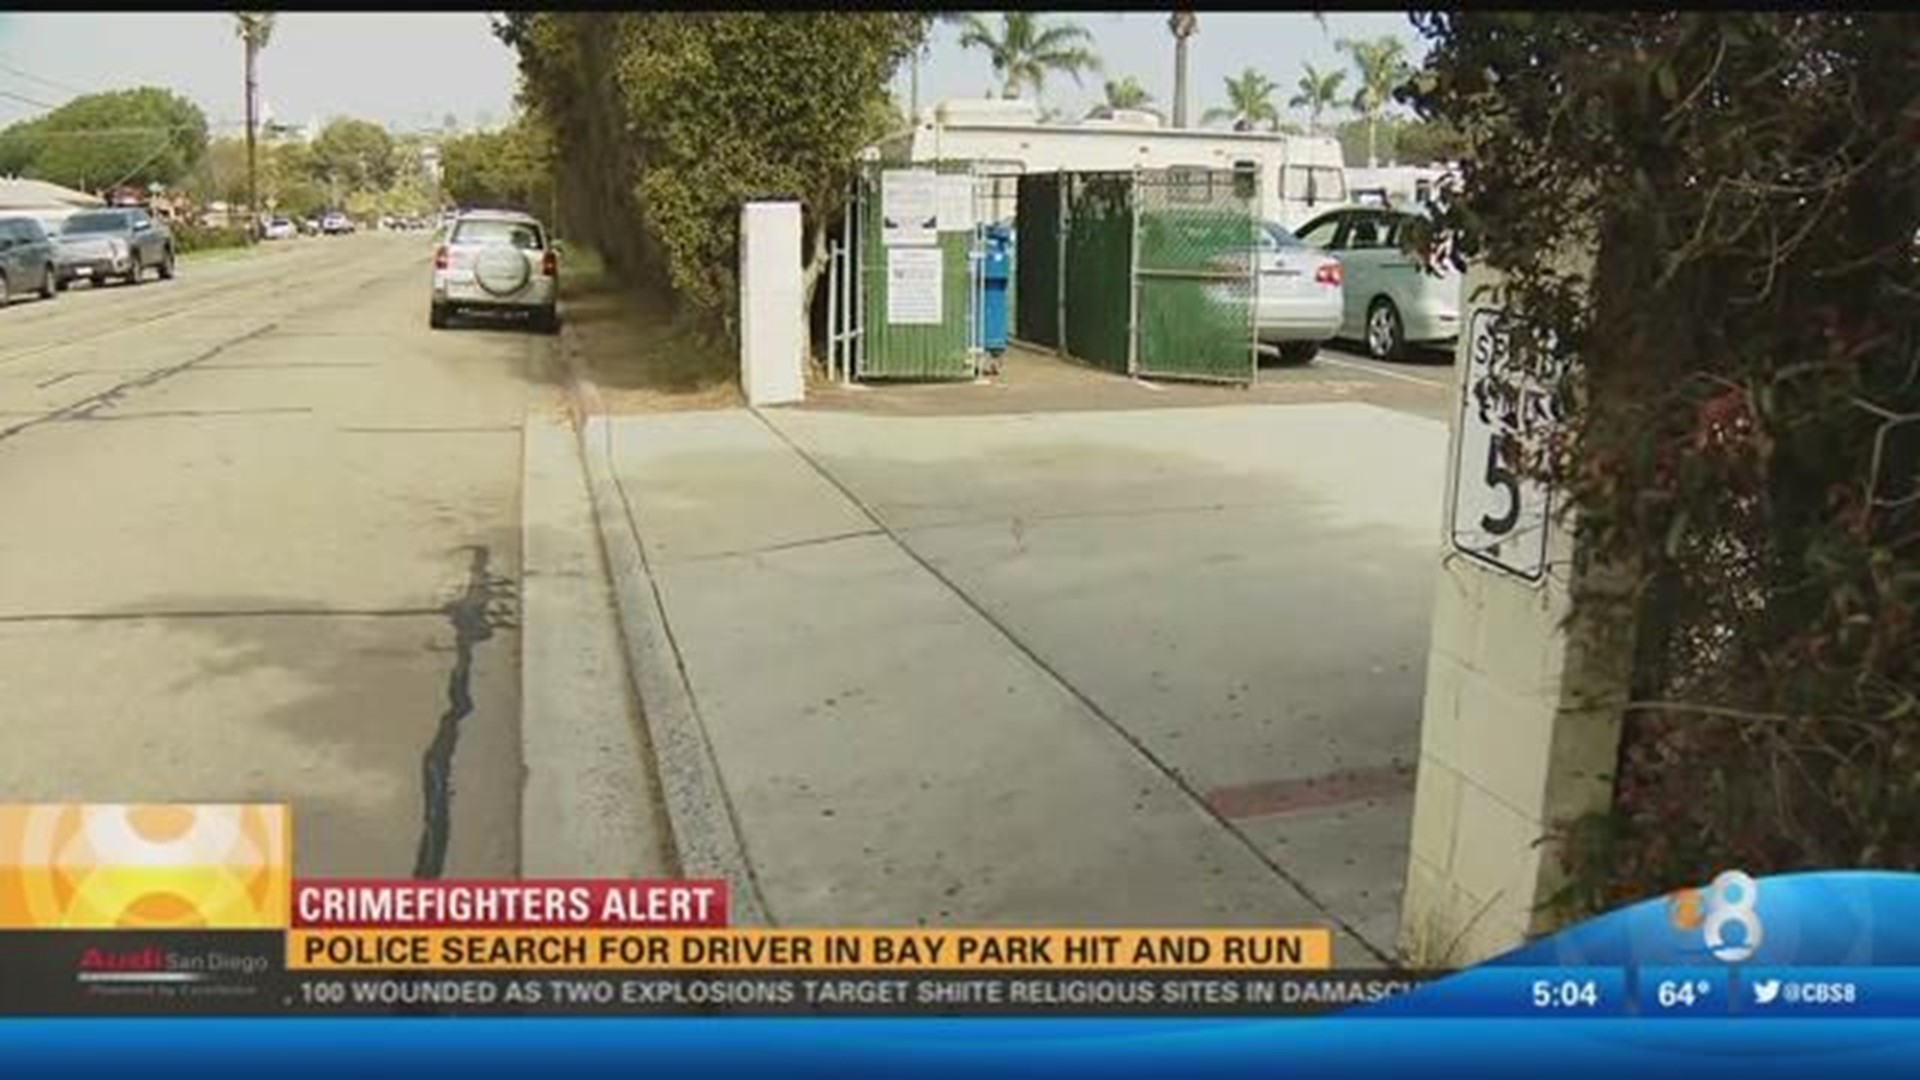 Police search for driver in Bay Park hit-and-run